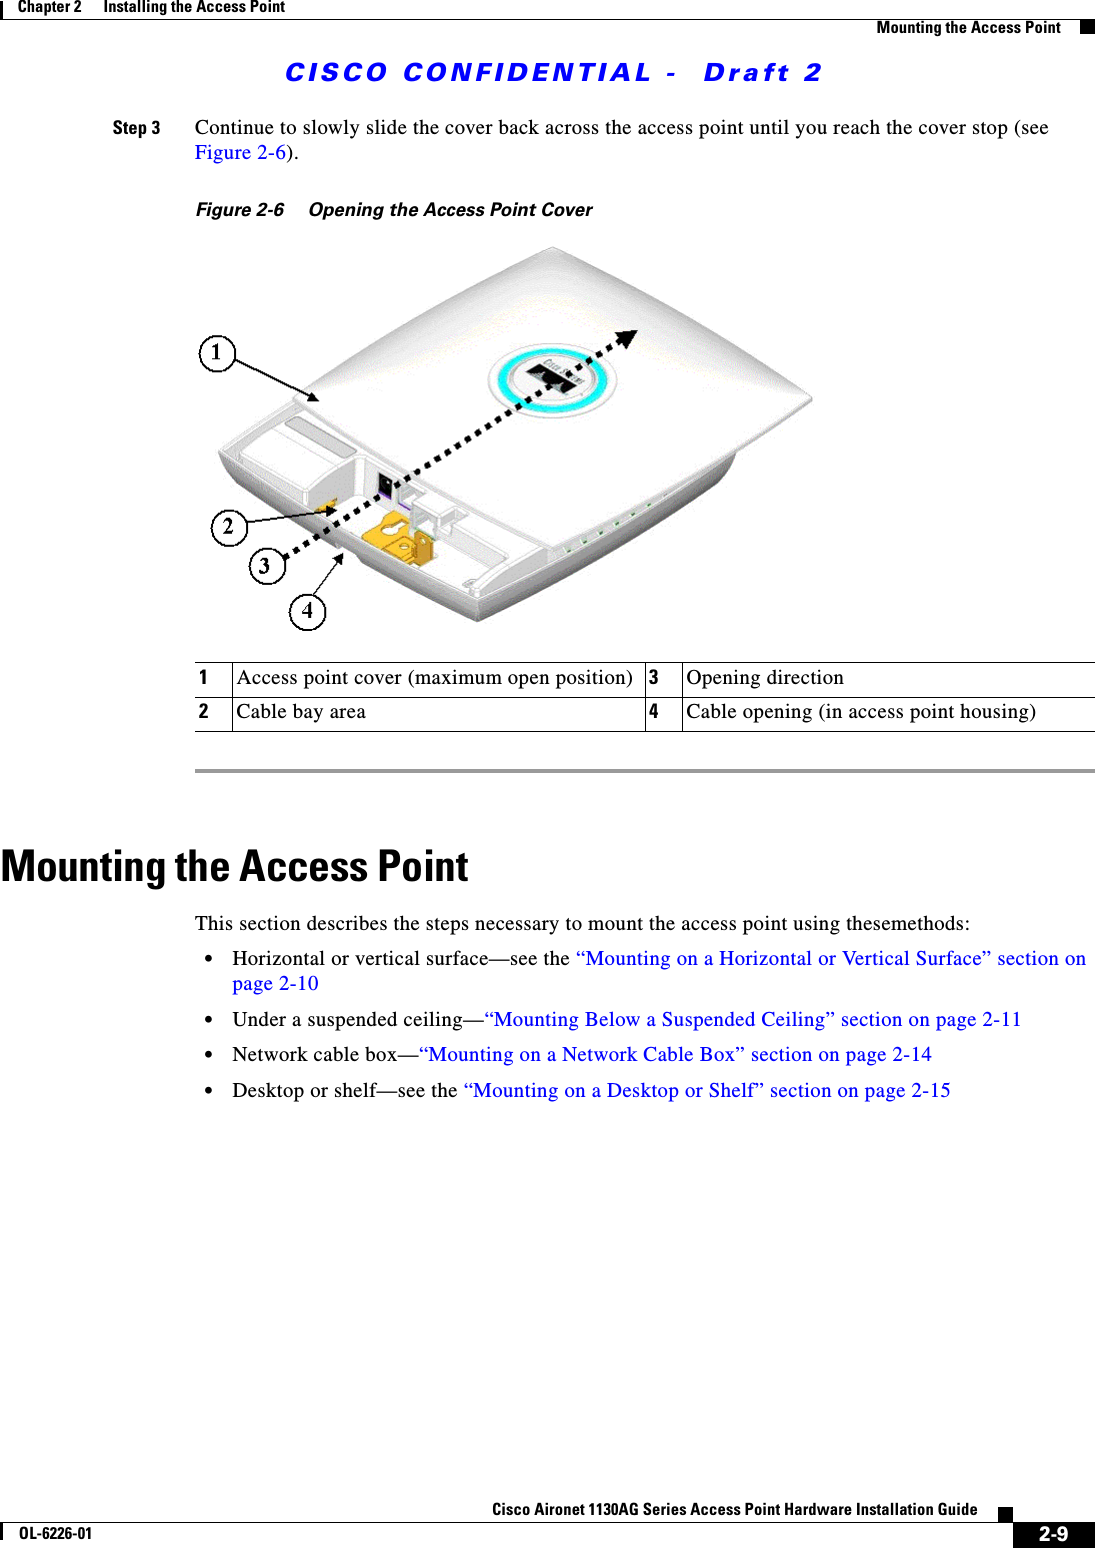  CISCO CONFIDENTIAL -  Draft 22-9Cisco Aironet 1130AG Series Access Point Hardware Installation GuideOL-6226-01Chapter 2      Installing the Access PointMounting the Access PointStep 3 Continue to slowly slide the cover back across the access point until you reach the cover stop (see Figure 2-6).Figure 2-6 Opening the Access Point Cover Mounting the Access PointThis section describes the steps necessary to mount the access point using thesemethods:•Horizontal or vertical surface—see the “Mounting on a Horizontal or Vertical Surface” section on page 2-10•Under a suspended ceiling—“Mounting Below a Suspended Ceiling” section on page 2-11•Network cable box—“Mounting on a Network Cable Box” section on page 2-14•Desktop or shelf—see the “Mounting on a Desktop or Shelf” section on page 2-151Access point cover (maximum open position) 3Opening direction2Cable bay area 4Cable opening (in access point housing)